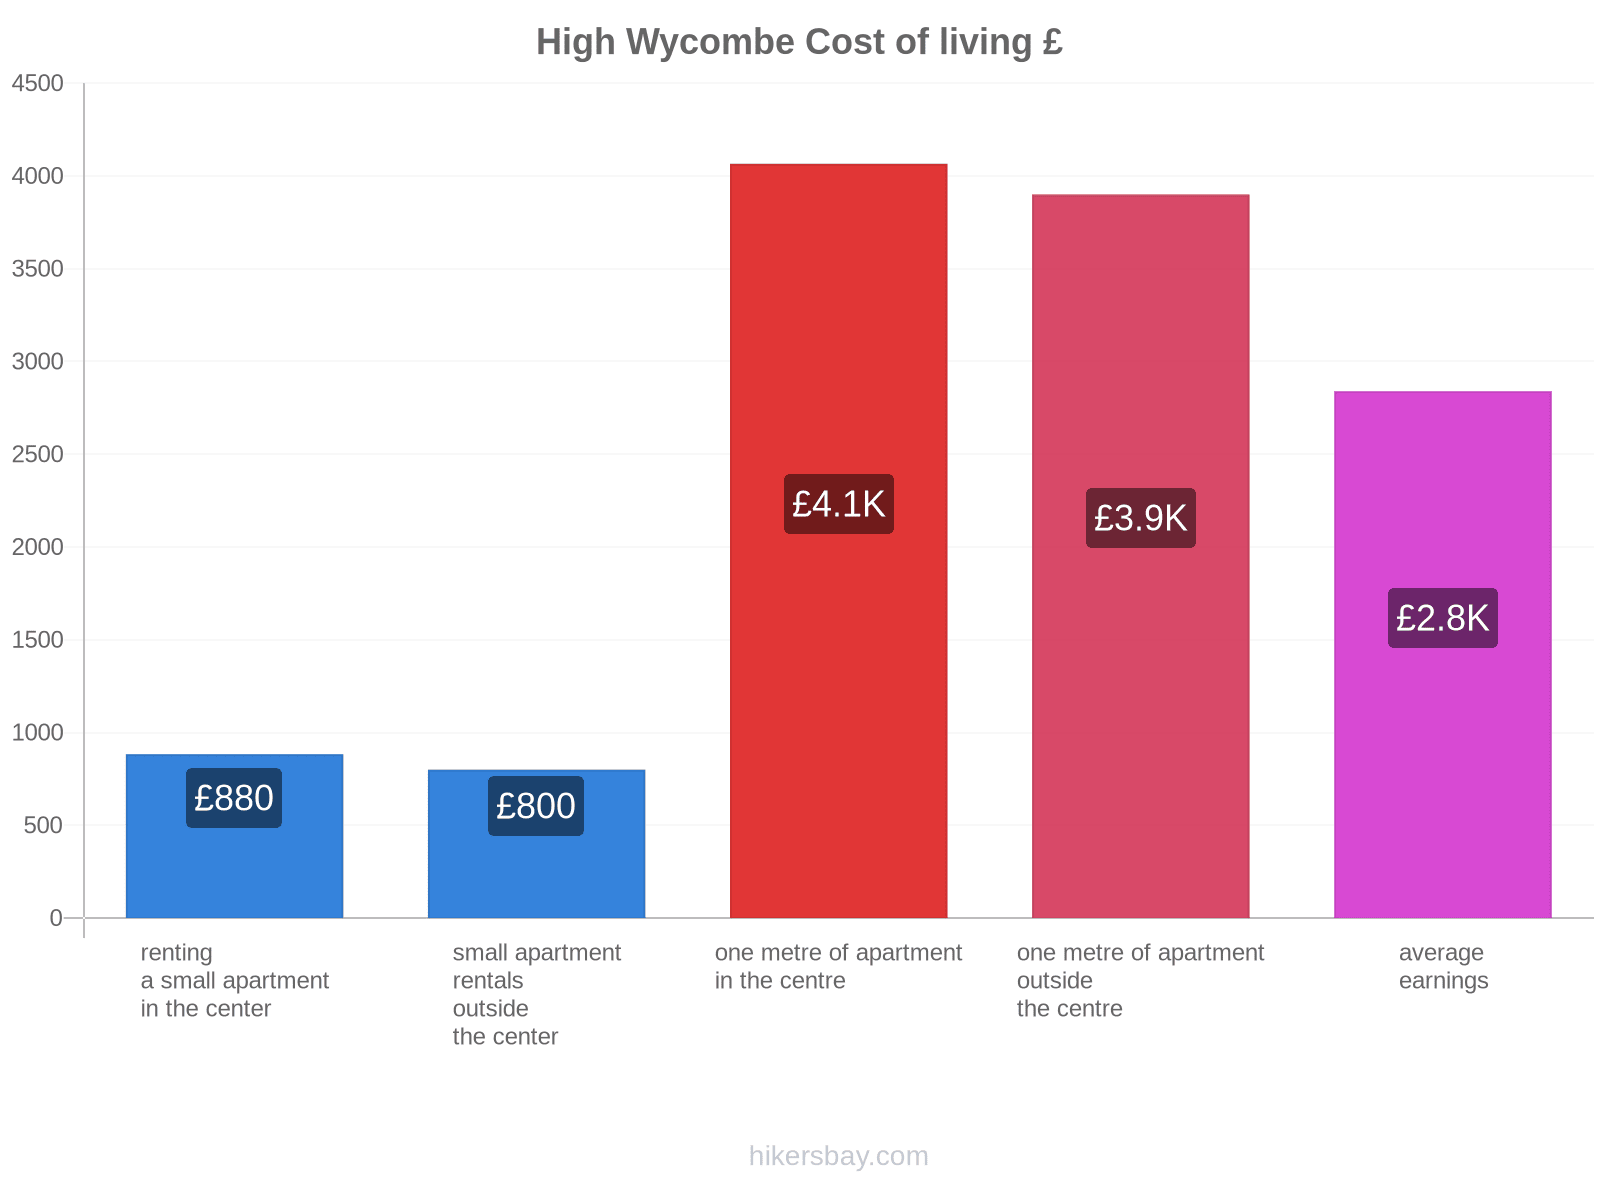 High Wycombe cost of living hikersbay.com